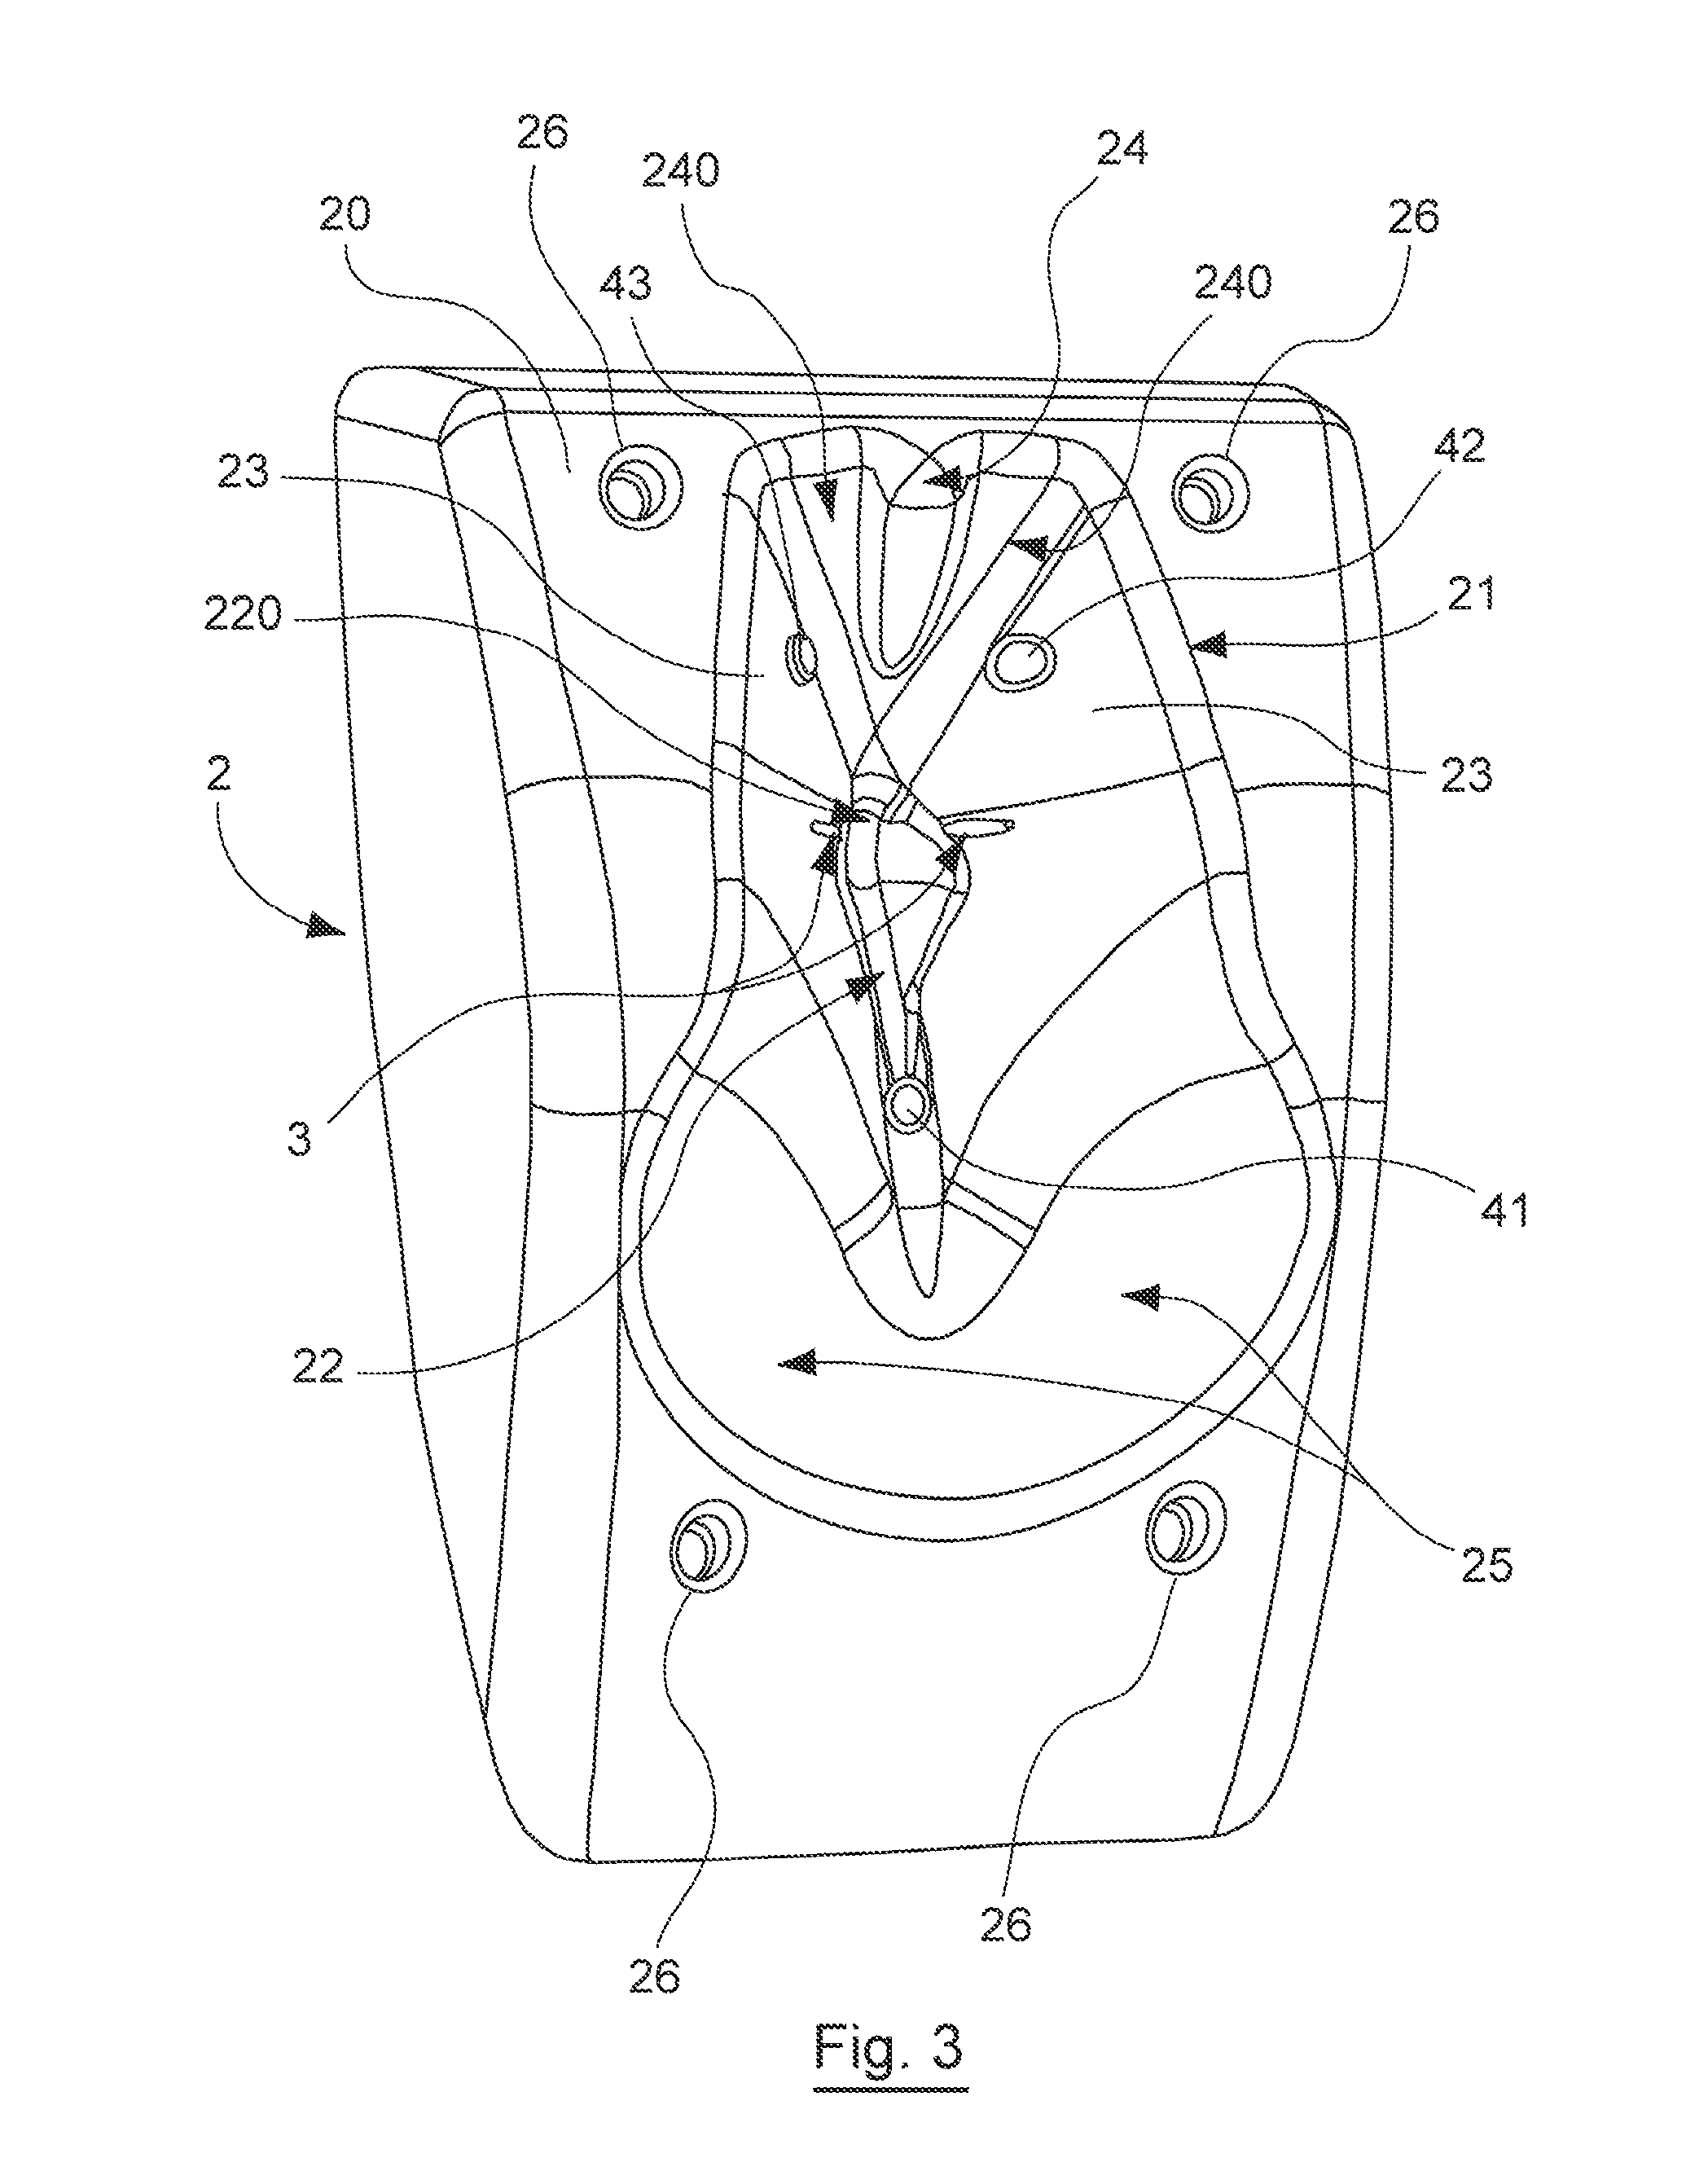 Device for injecting veterinary products to poultry including a contention member having an anatomic form with means for bracing a detectable bone